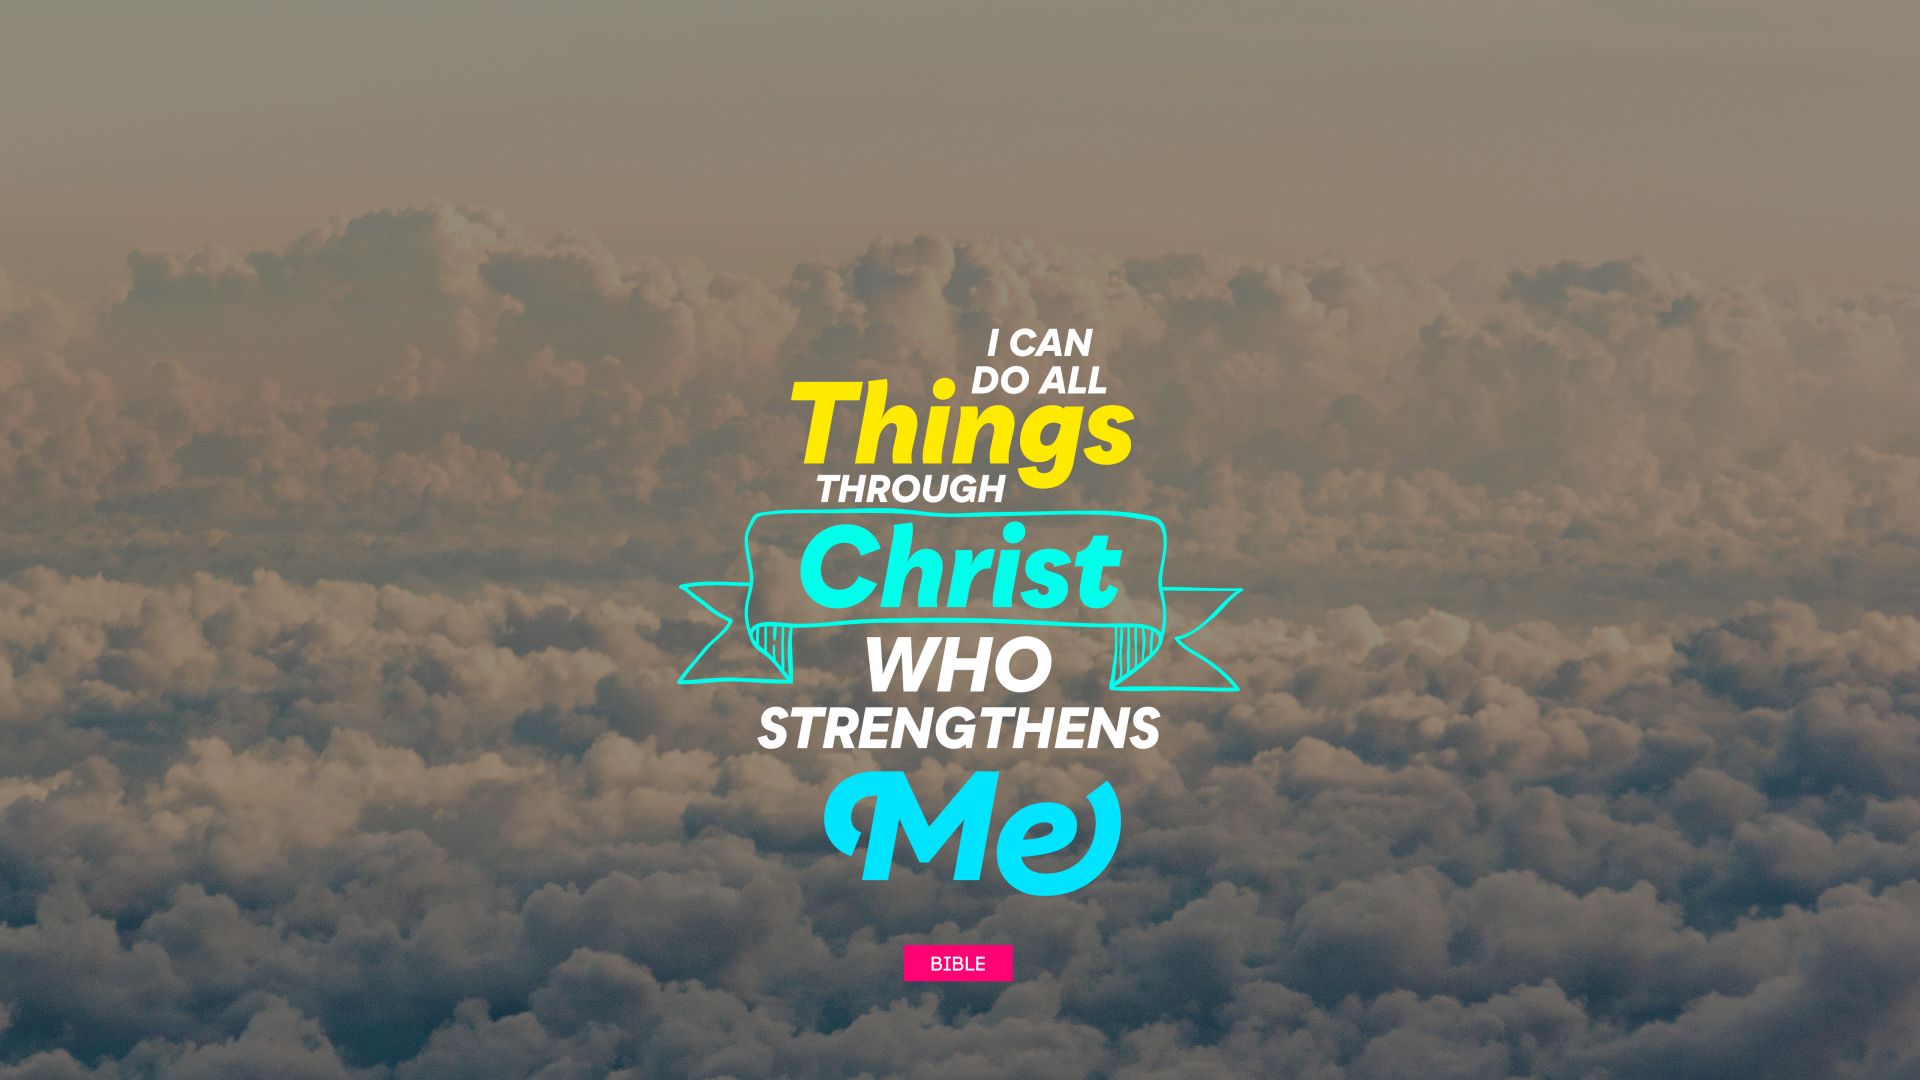 I can do all things through christ who strengthens me